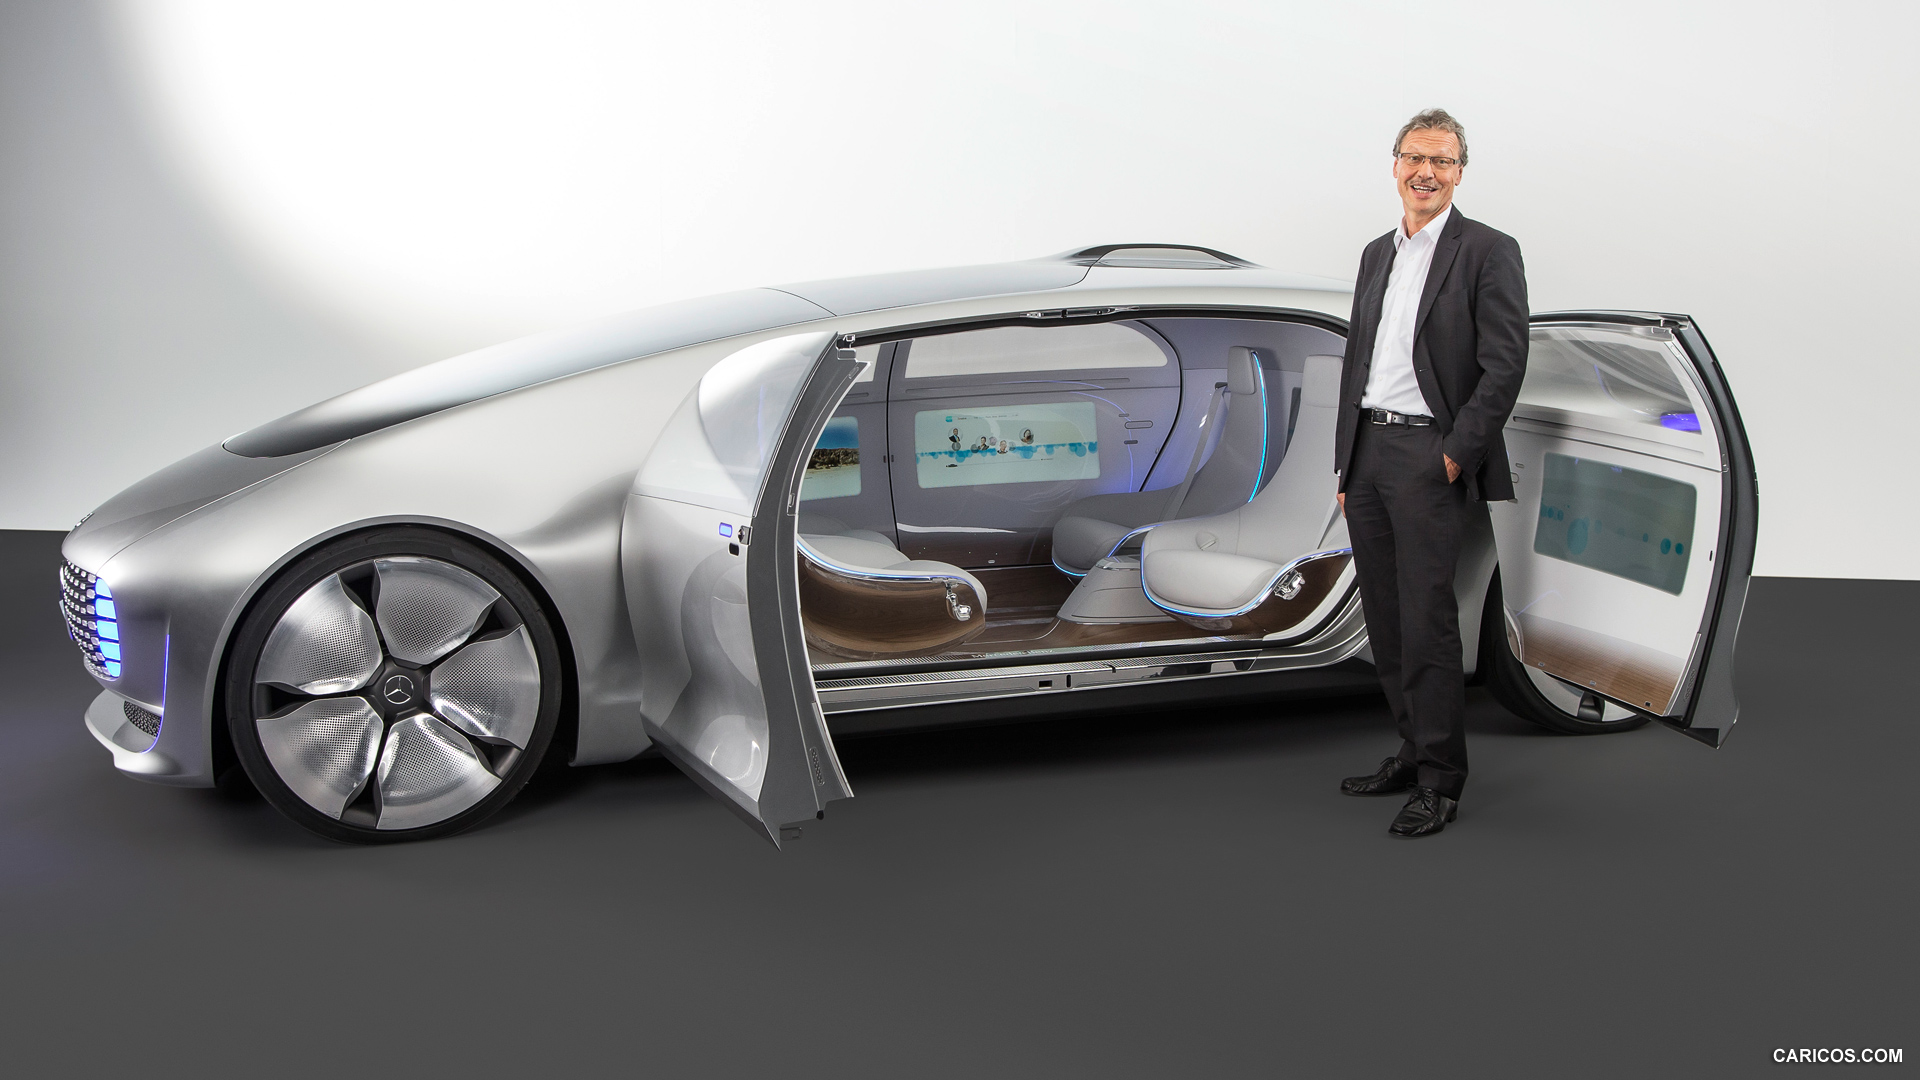 2015 Mercedes-Benz F 015 Luxury in Motion Concept  - Side, #73 of 92